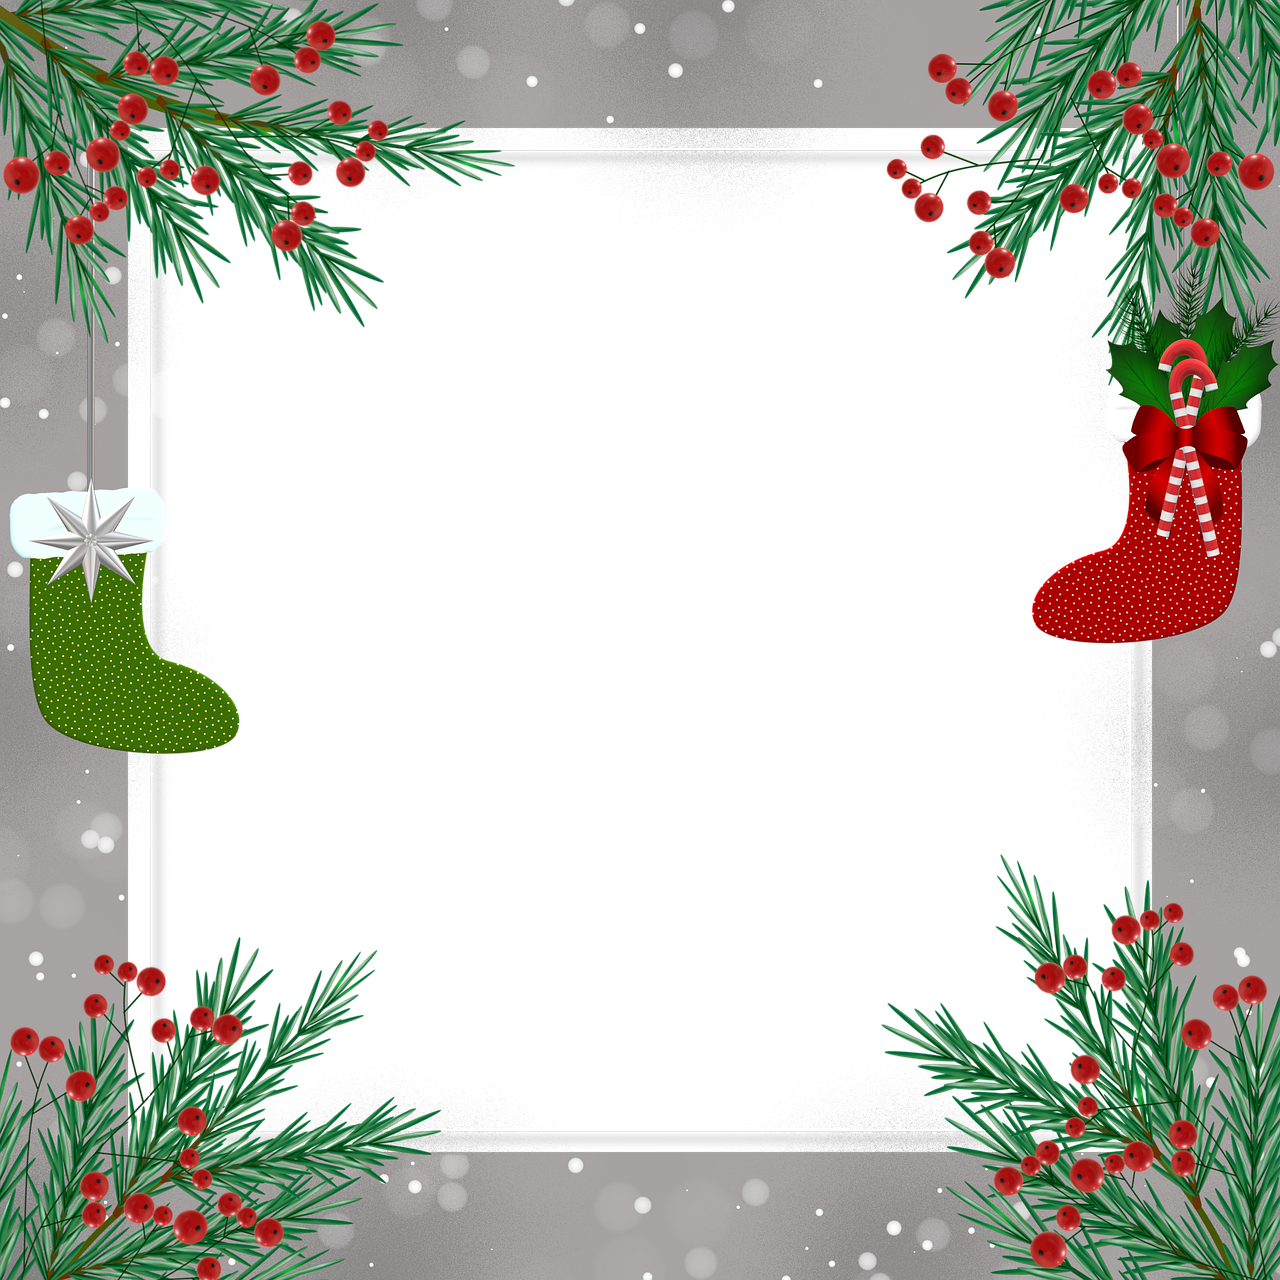 Frame Christmas Ornaments Free Photo PNG Image